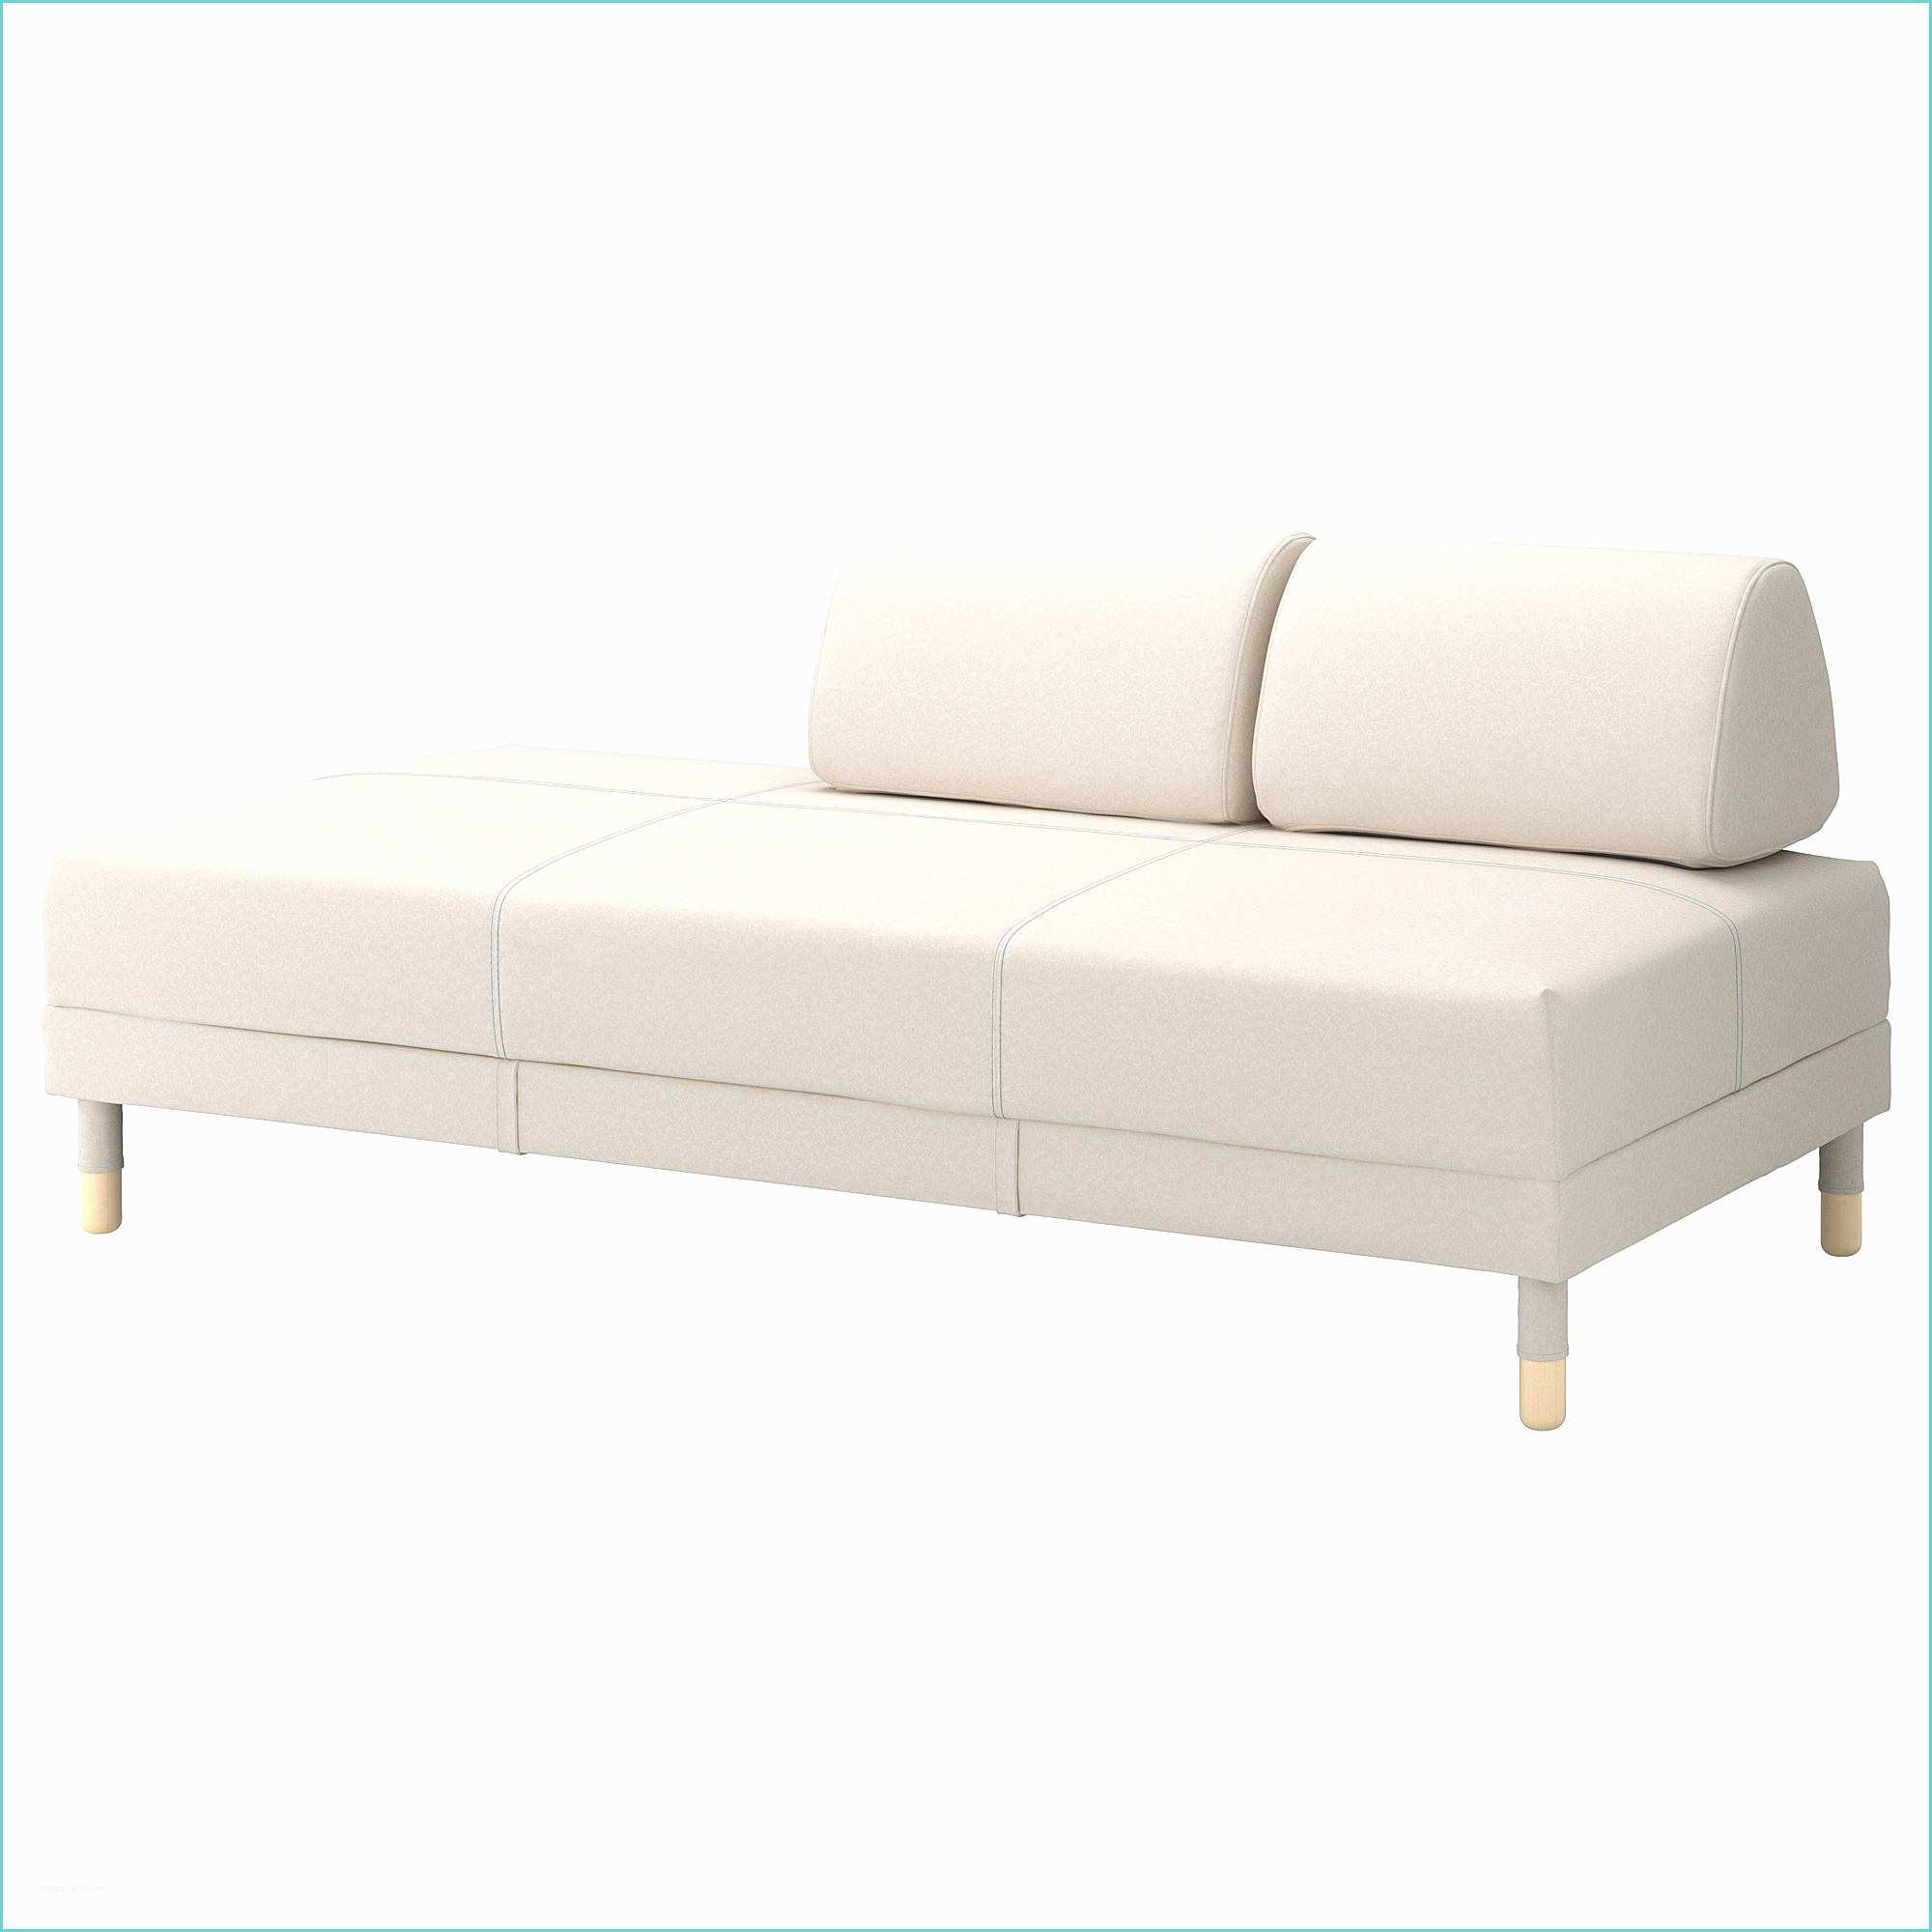 Banquette Lit Fly Clic Clac Pas Cher Fly Banquette Futon Fly Metz Matelas